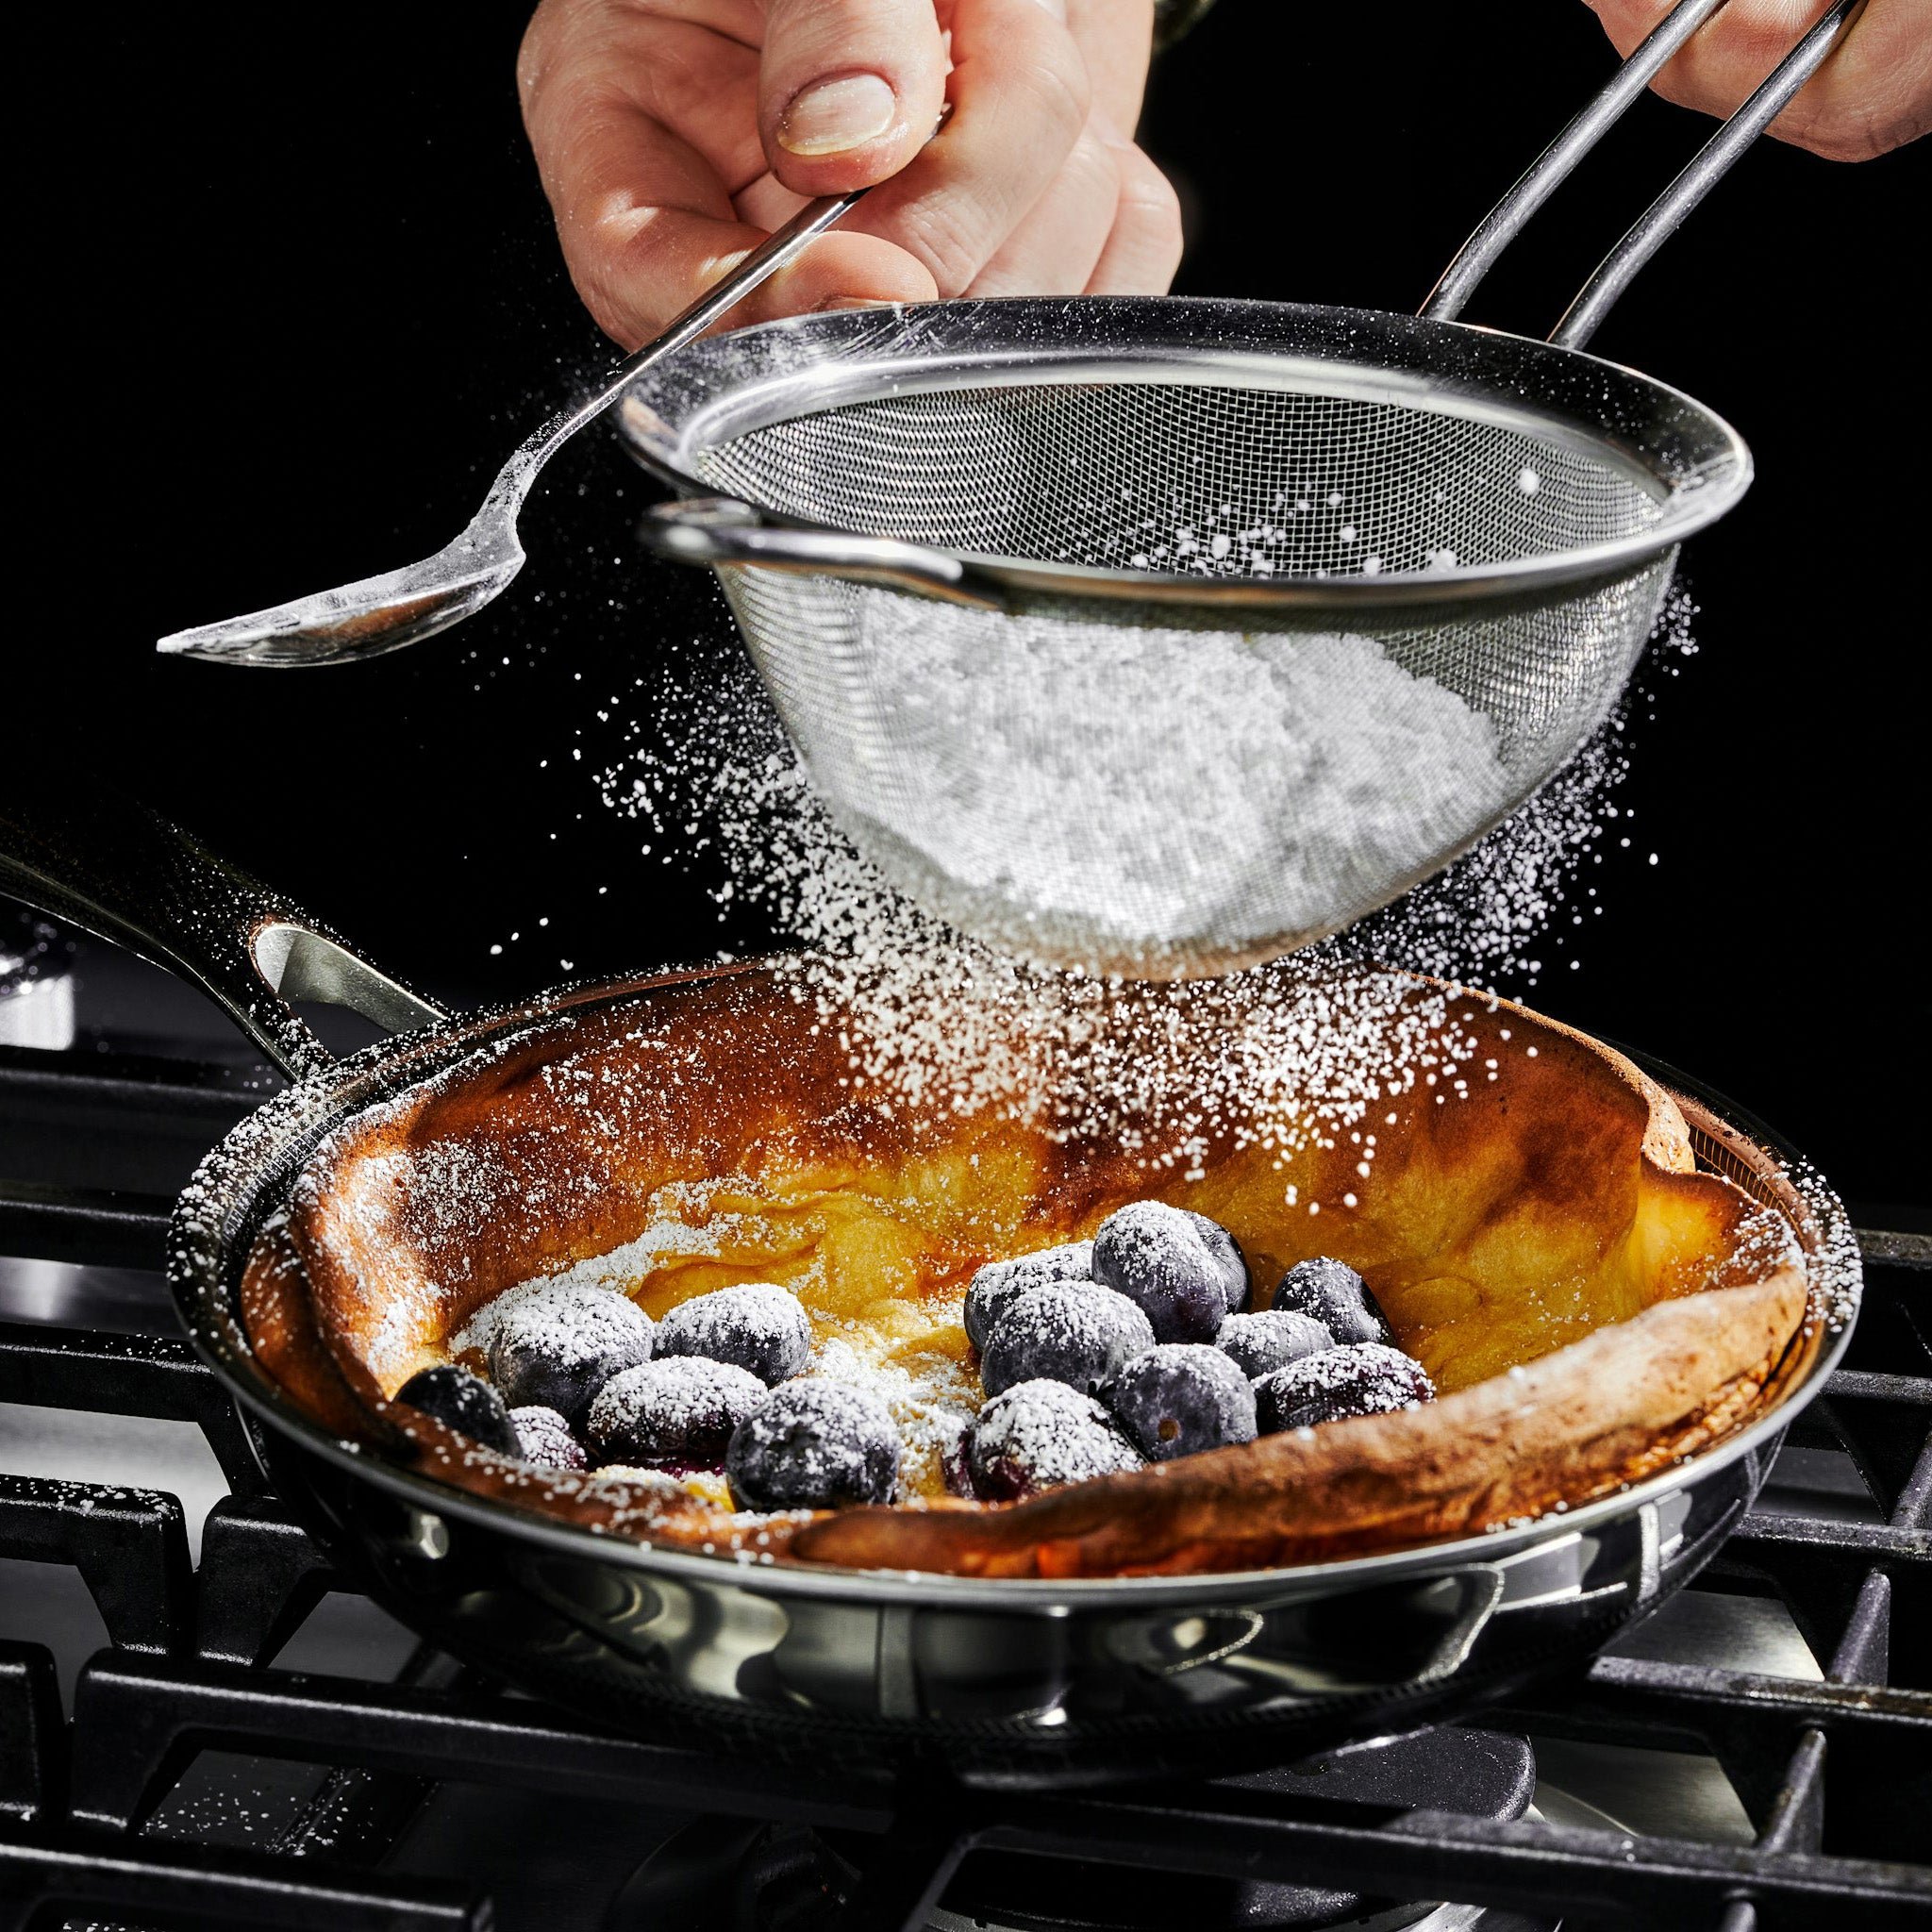 Sprinkling powdered sugar onto a Dutch baby pancake with blueberries.